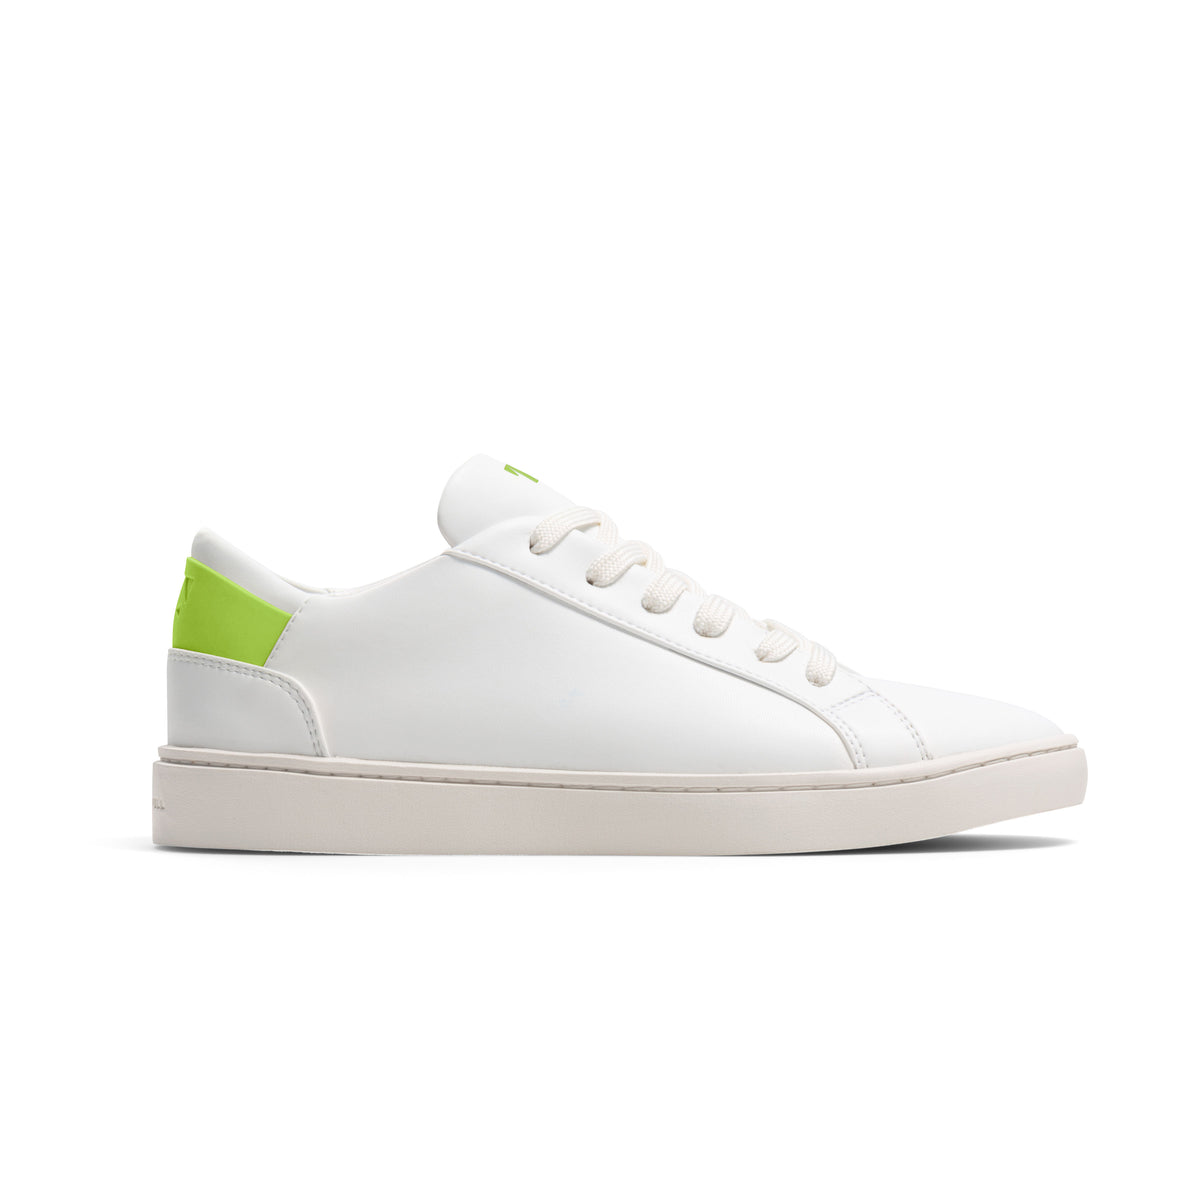 Women's Lace Up in Neon Green | Sustainable & Vegan - Thousand Fell